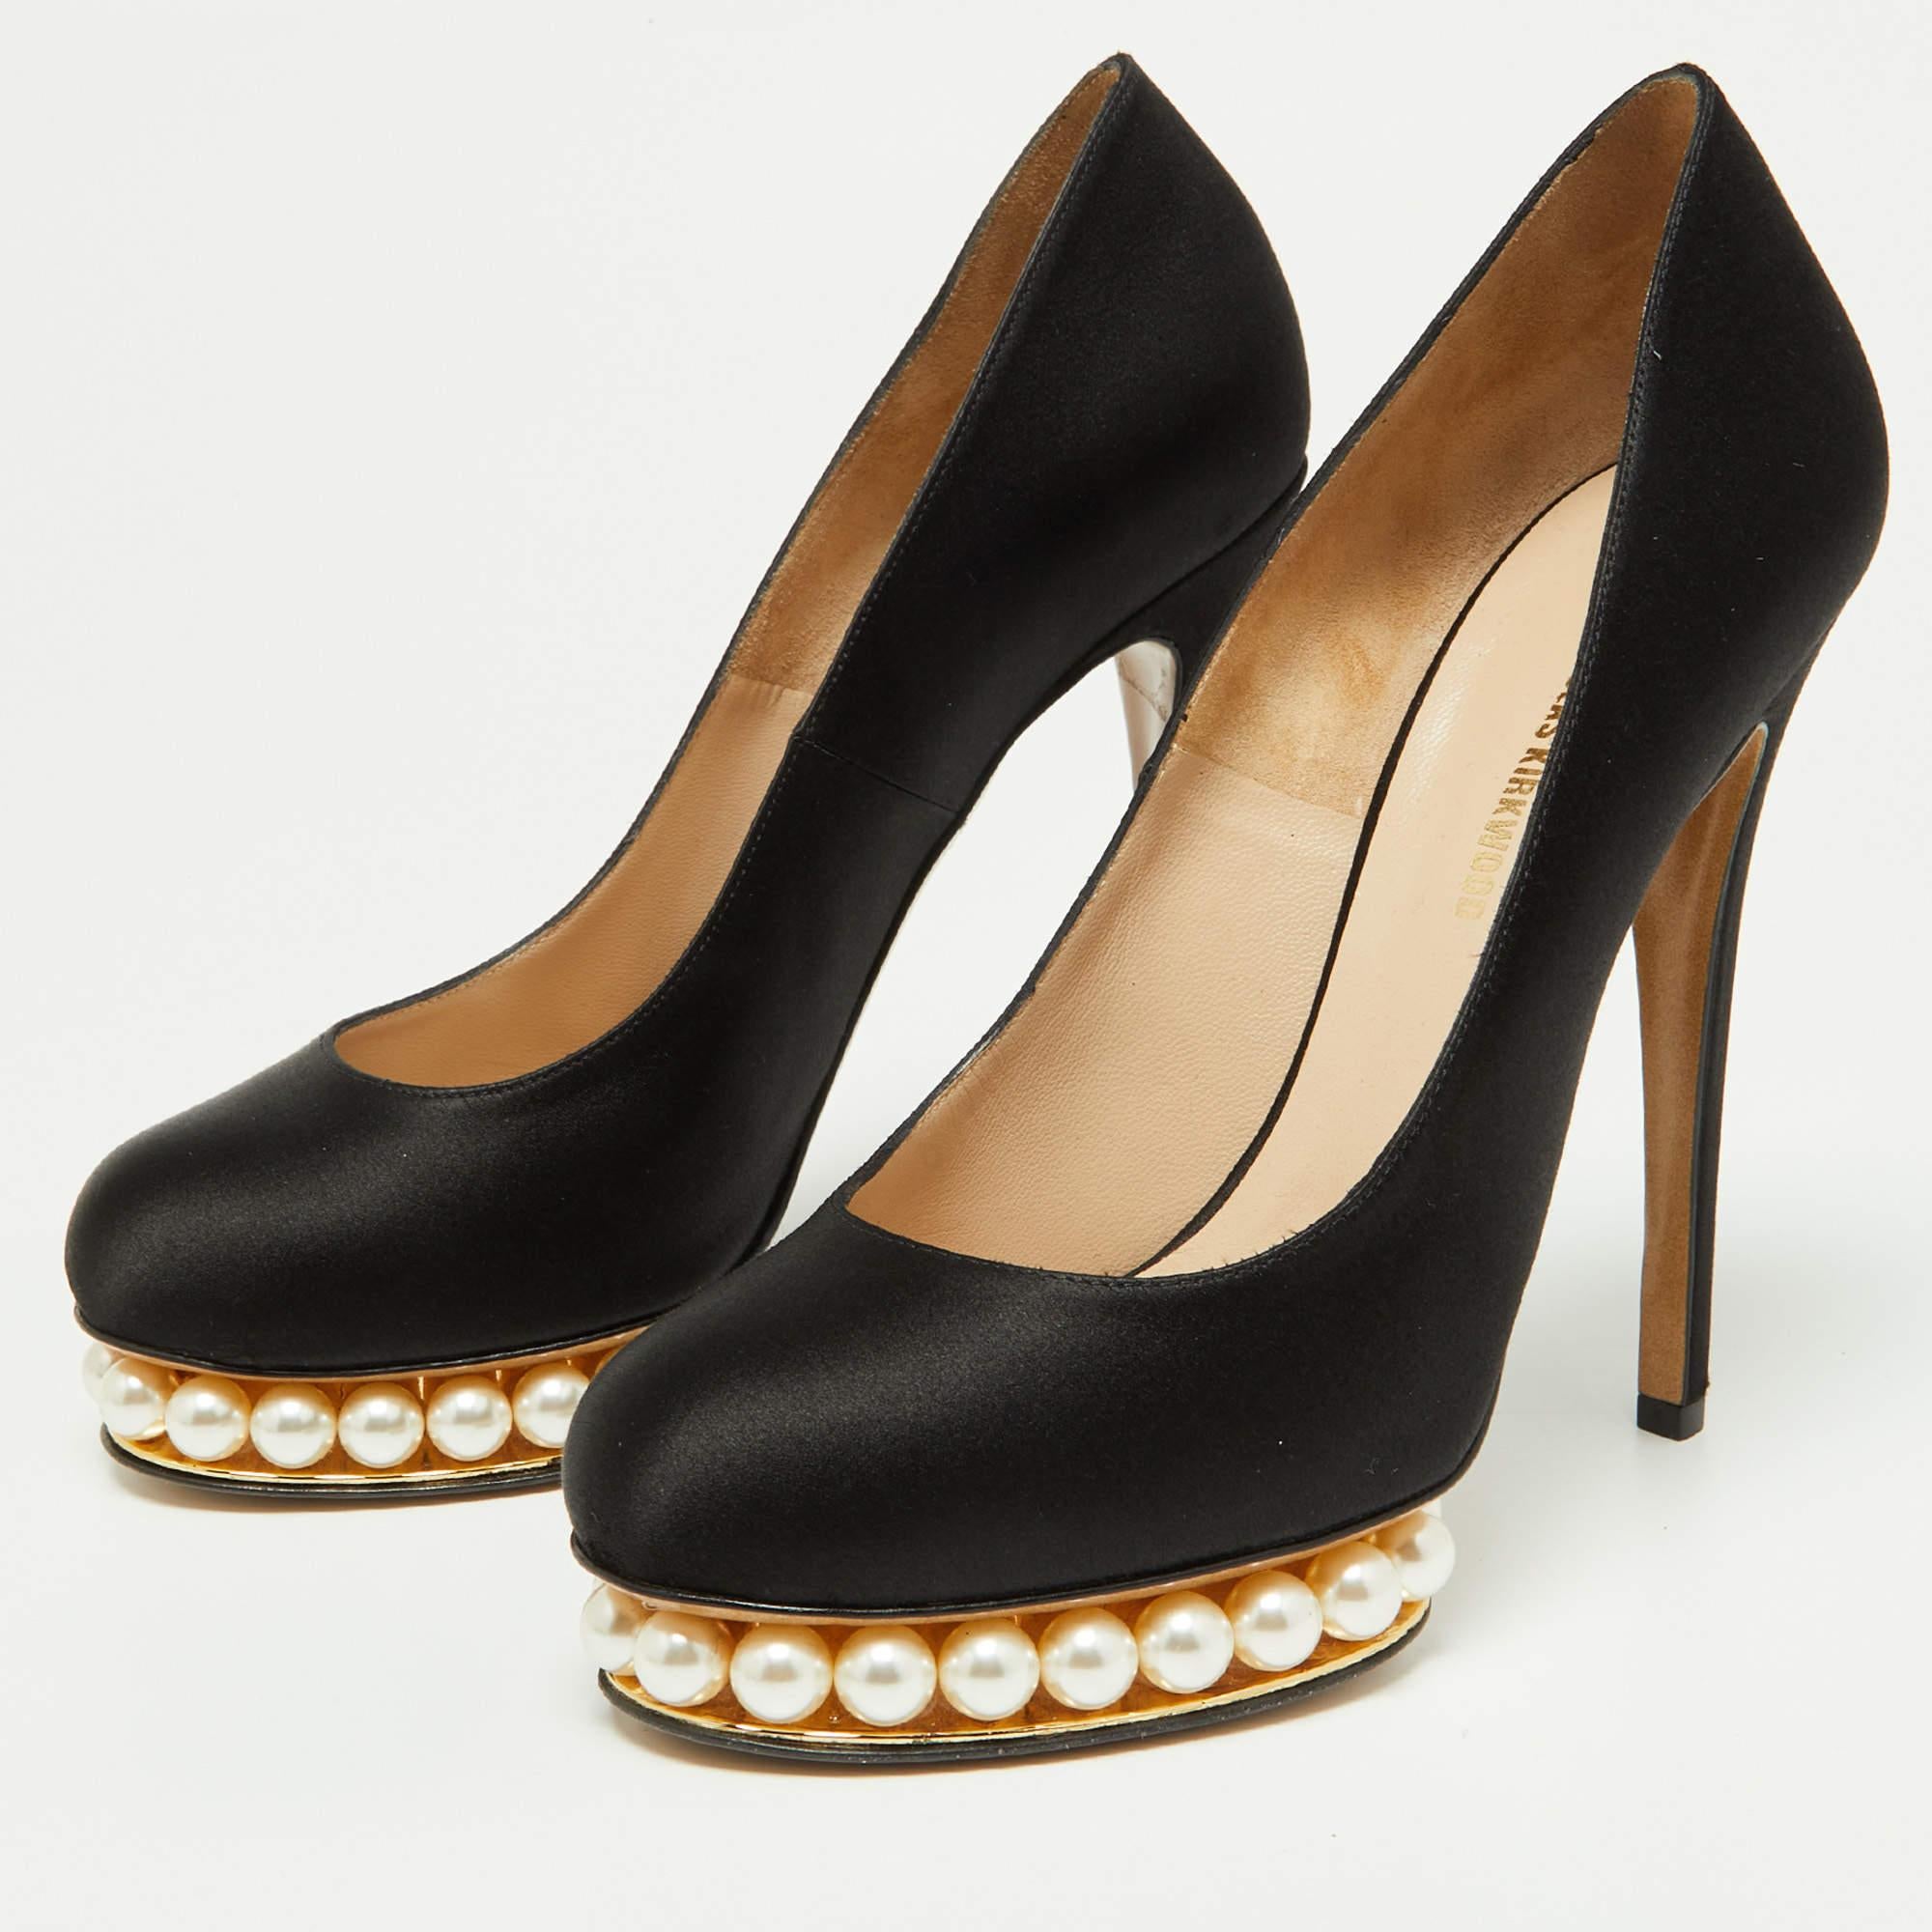 Exhibit an elegant style with this pair of pumps. These elegant shoes are crafted from quality materials. They are set on durable soles and sleek heels.

Includes: Original Dustbag